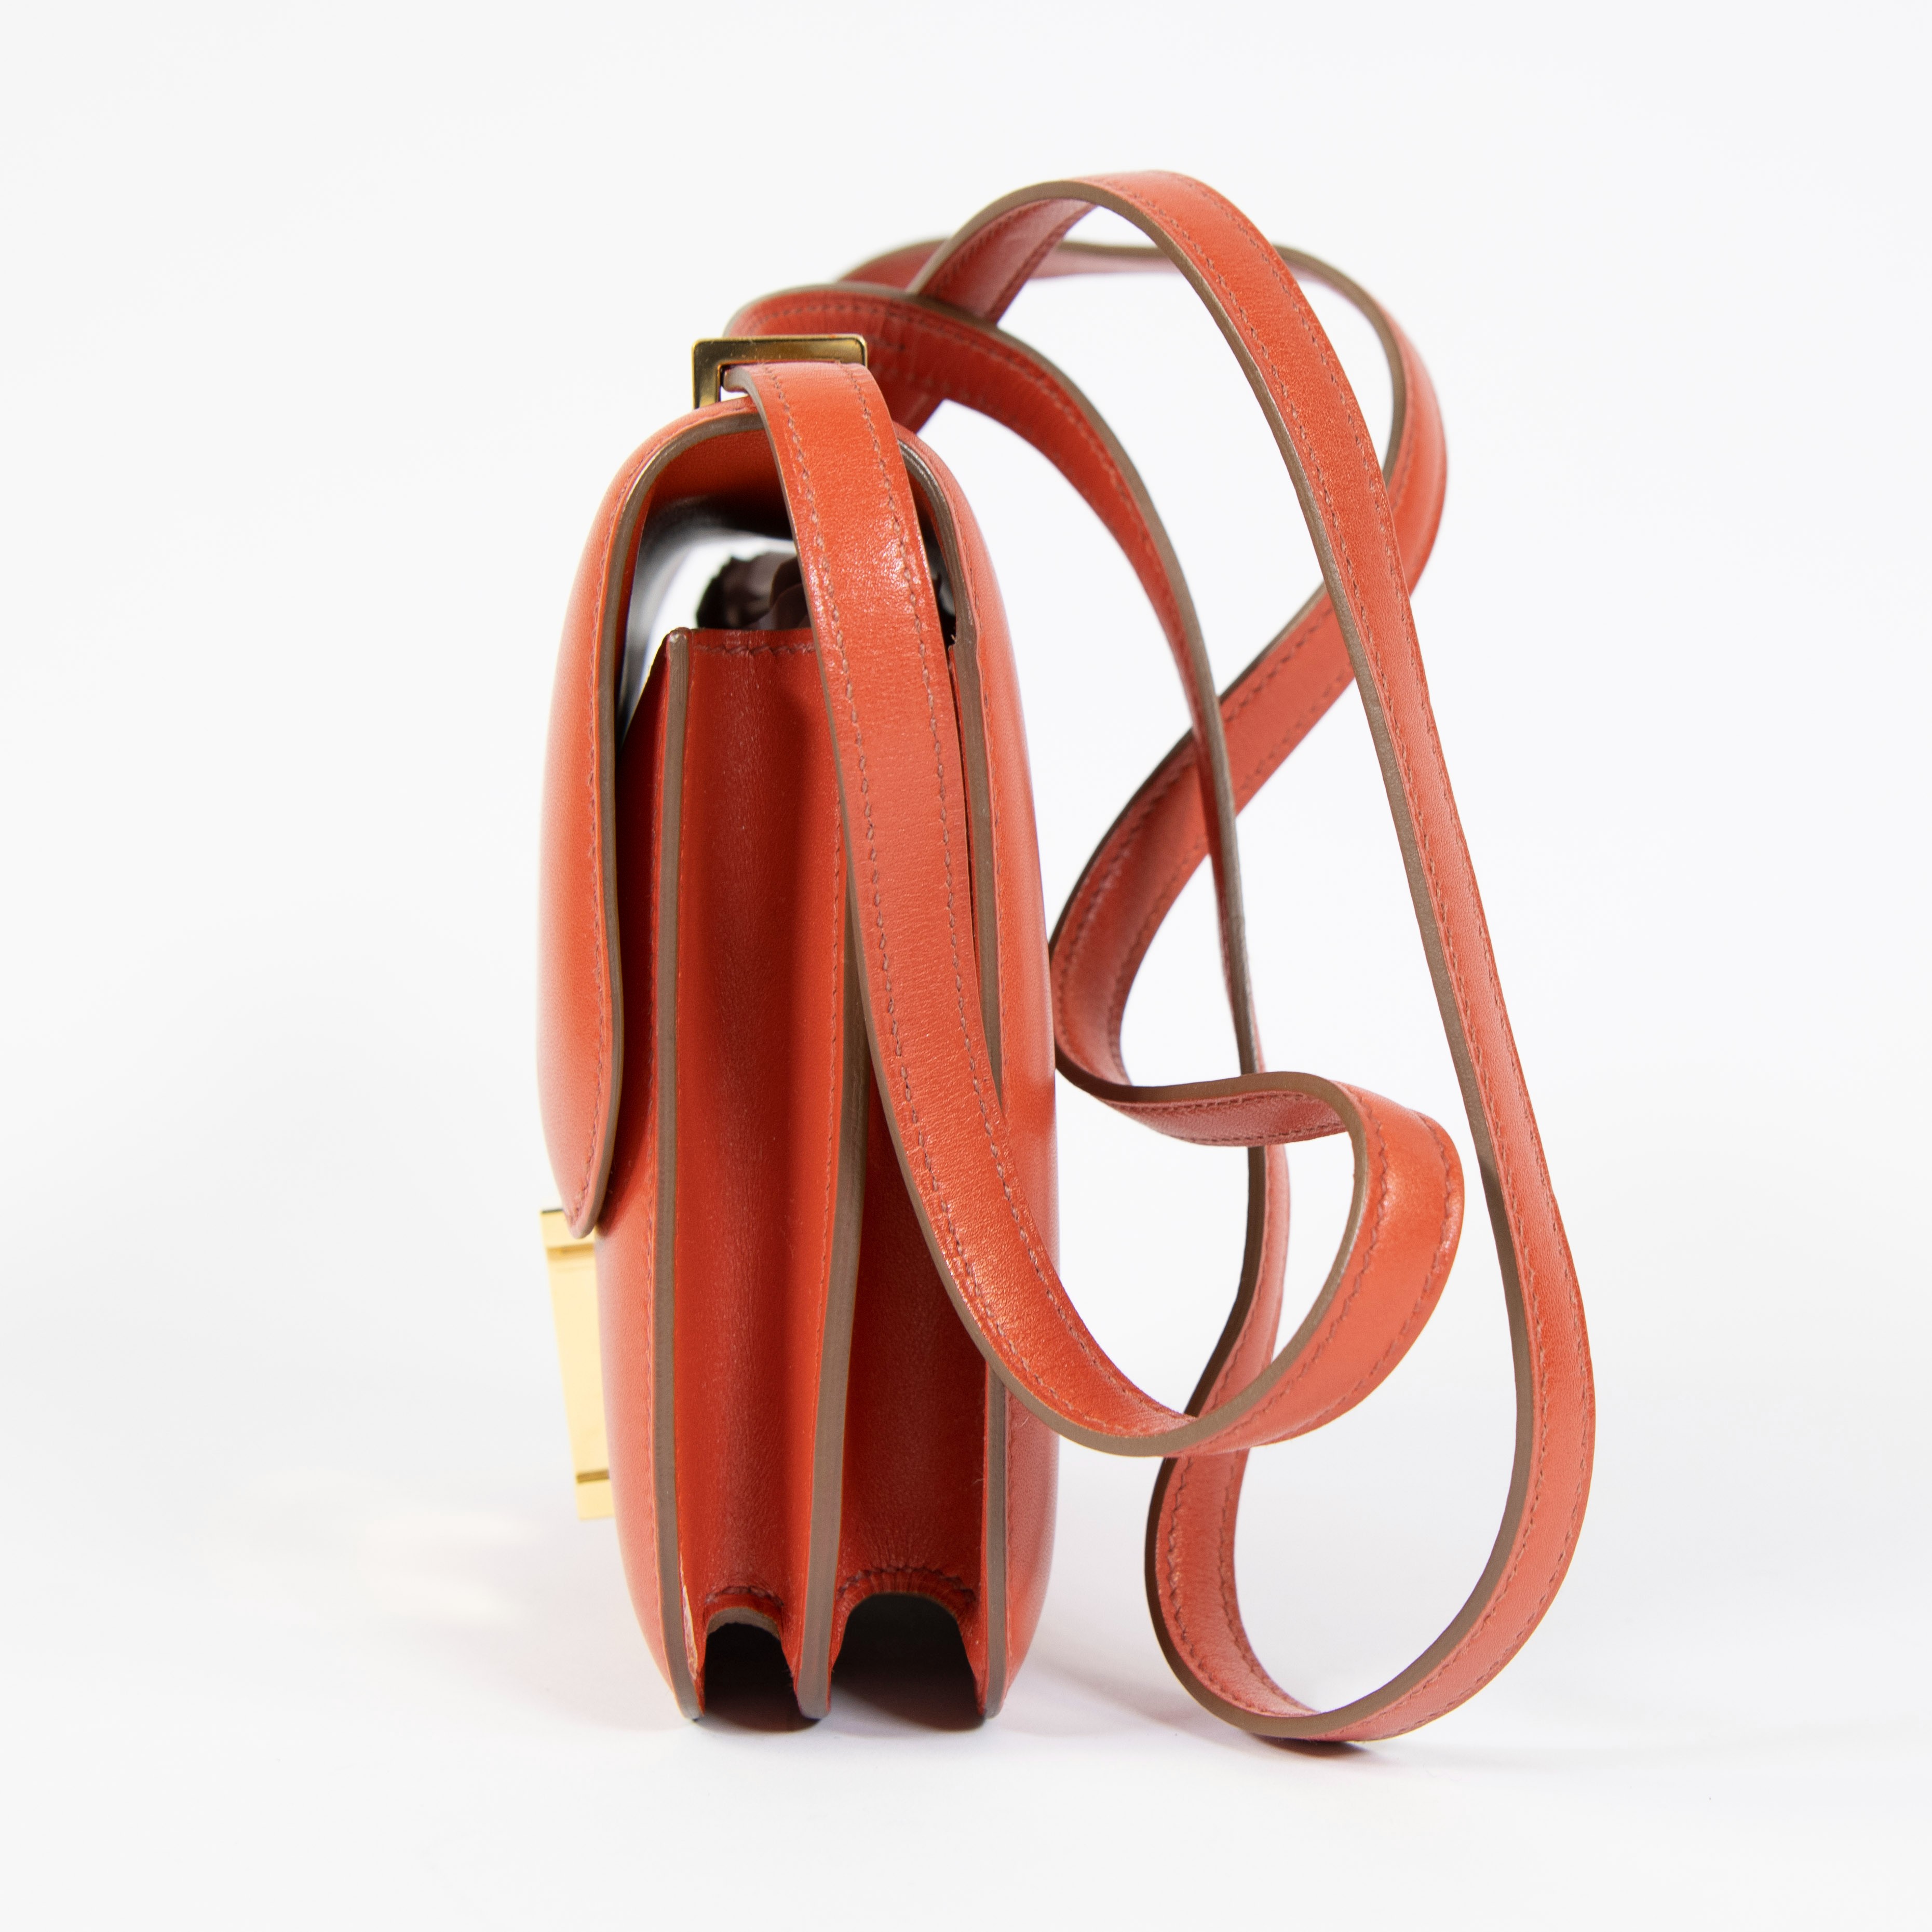 Hermes leather handback model Constance coral color with original bag and box - Image 4 of 9